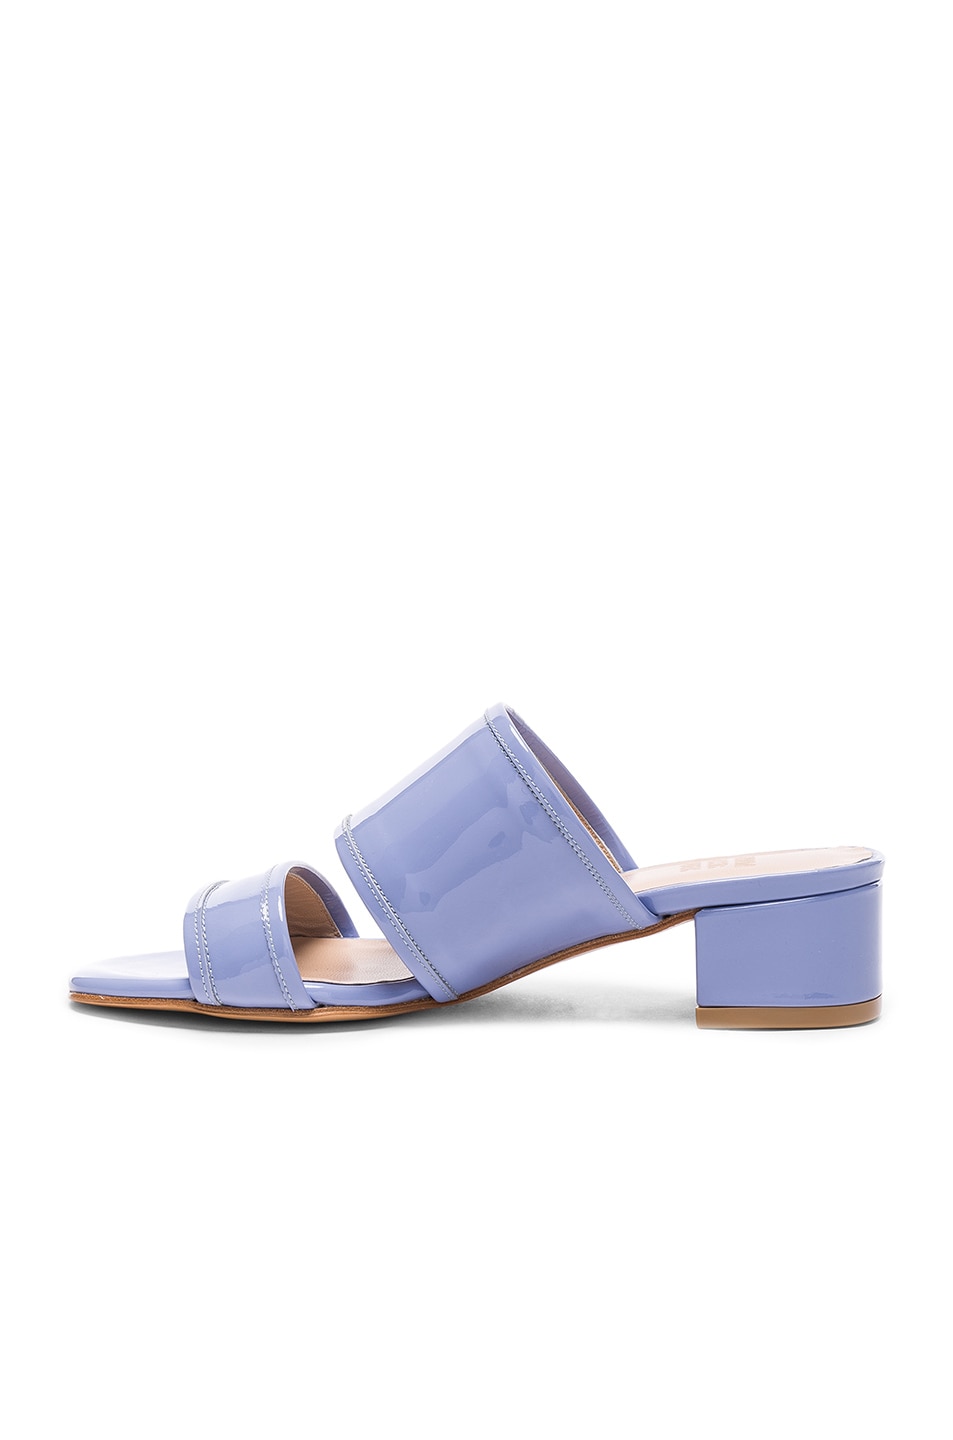 MARYAM NASSIR ZADEH Patent Leather Martina Slide Sandals, Periwinkle ...